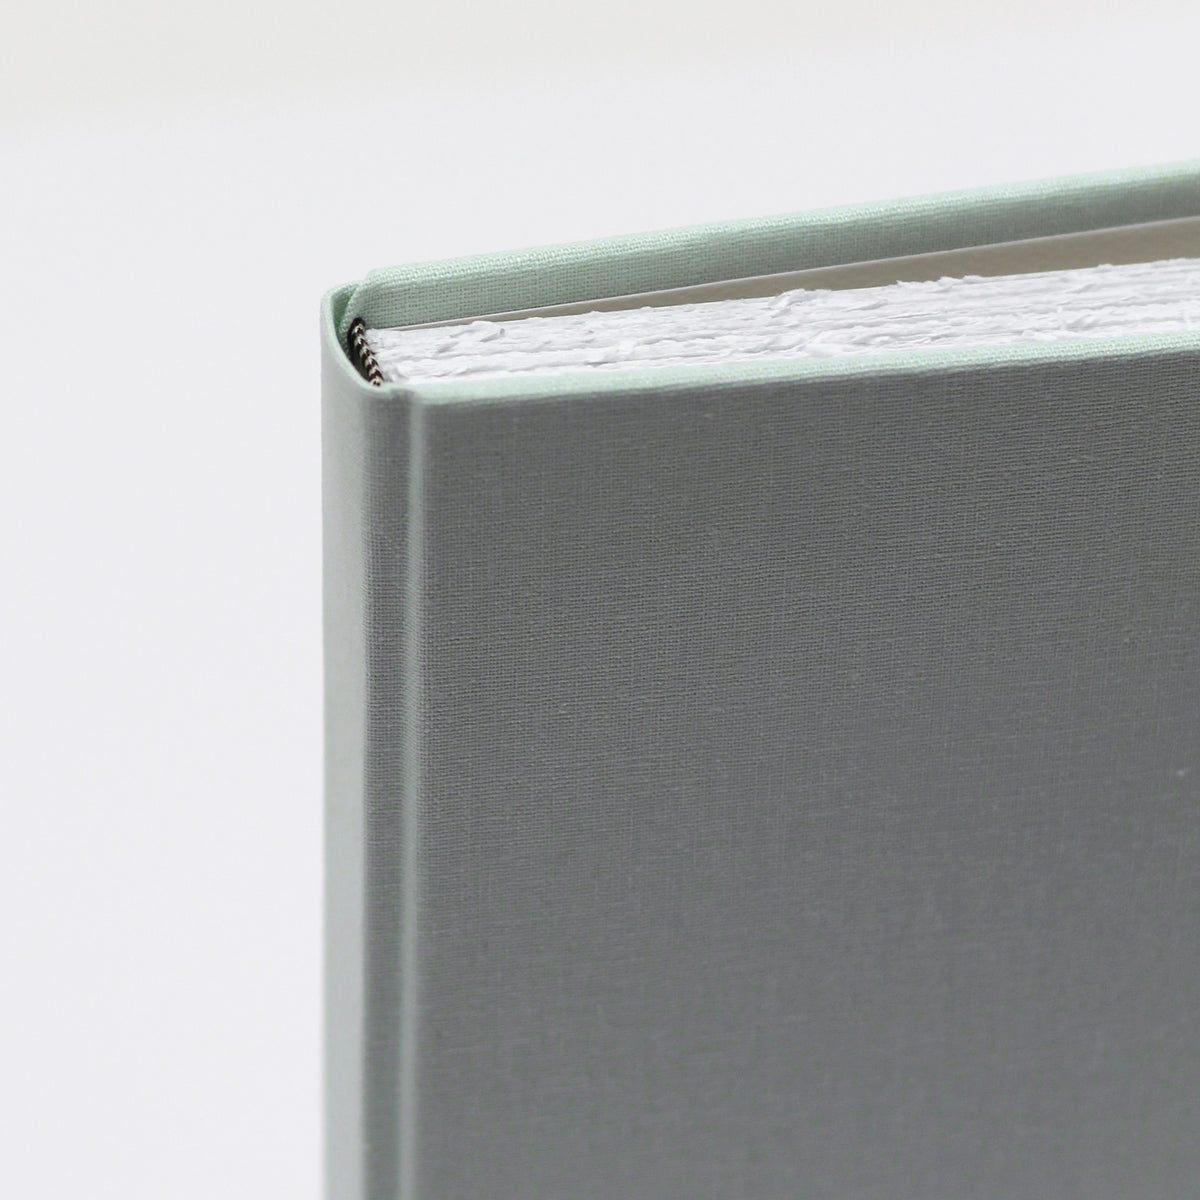 Large Blank Page Journal with Pastel Blue Cotton Cover